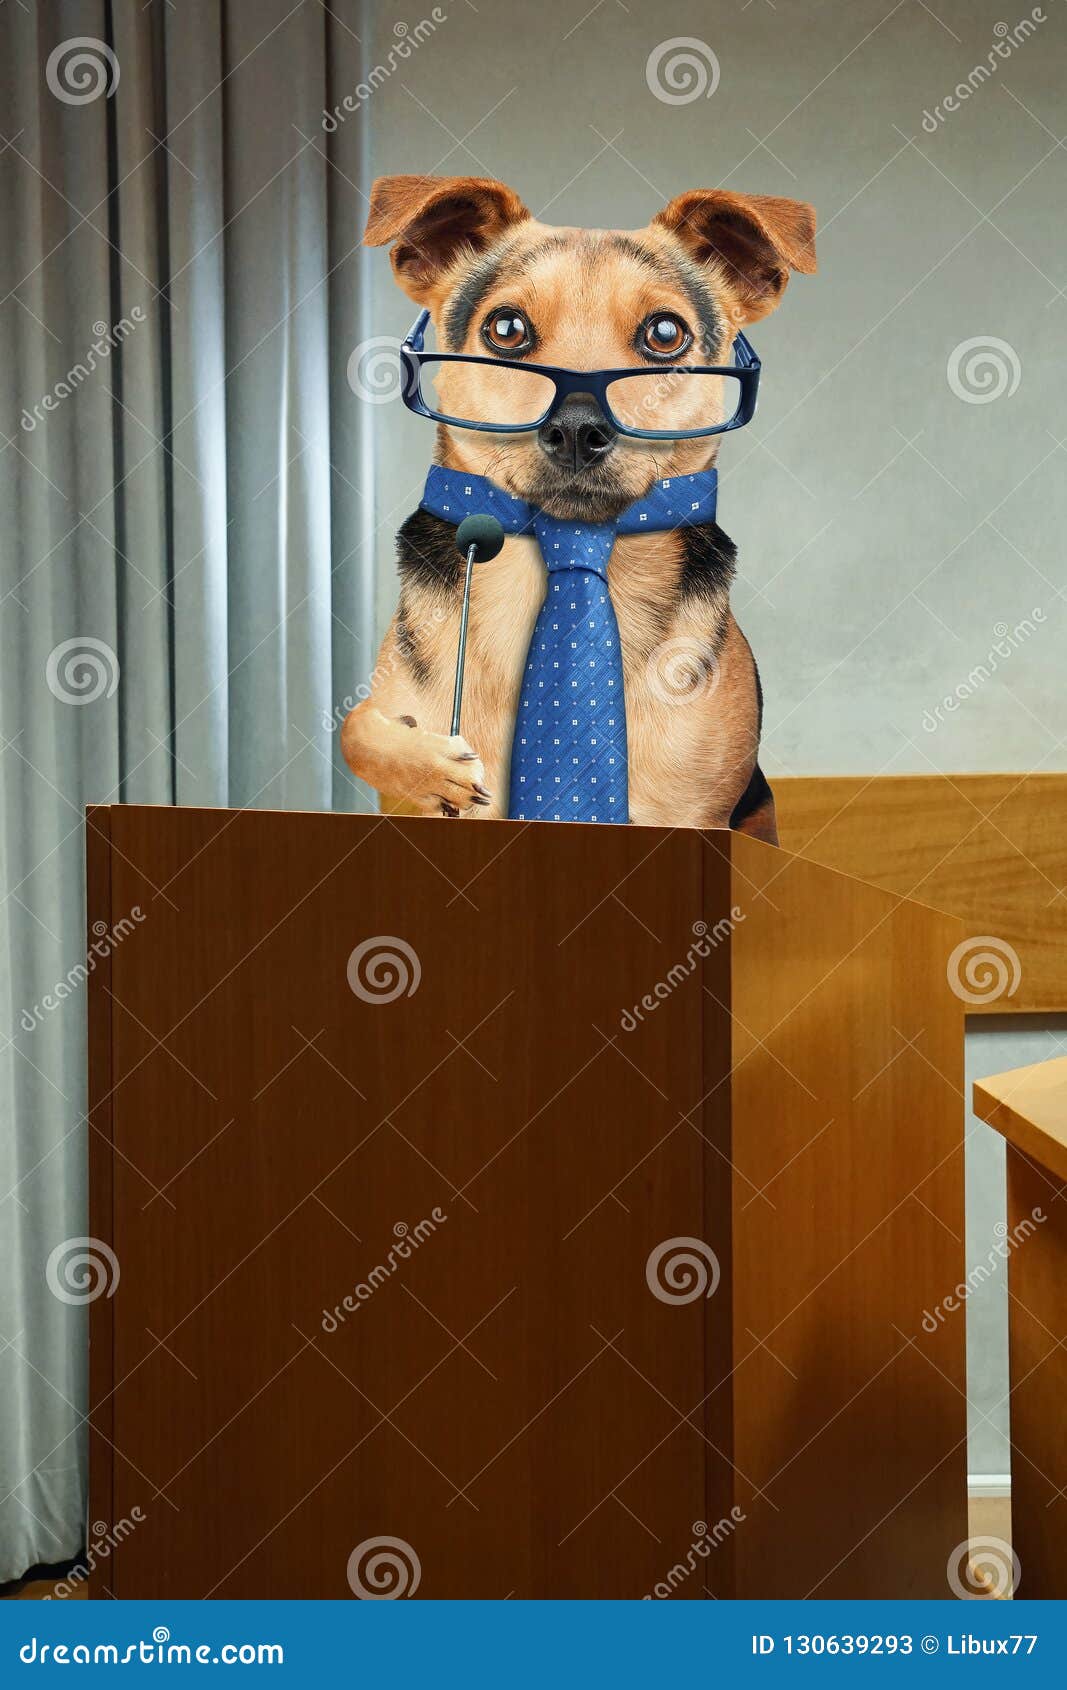 business dog having public speaking at podium pulpit with microphone